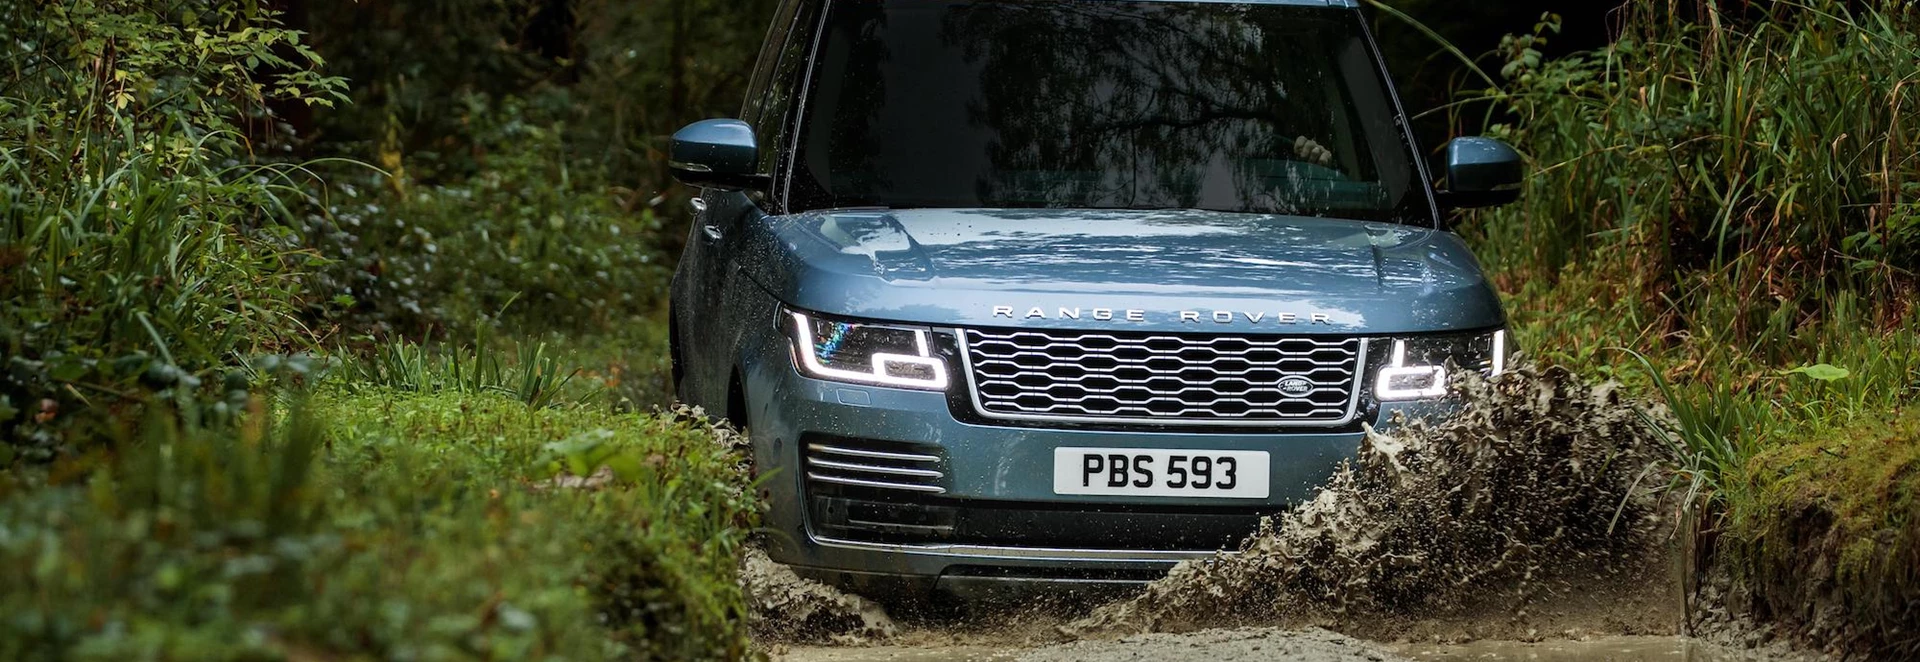 5 Things you didn't know about your Range Rover